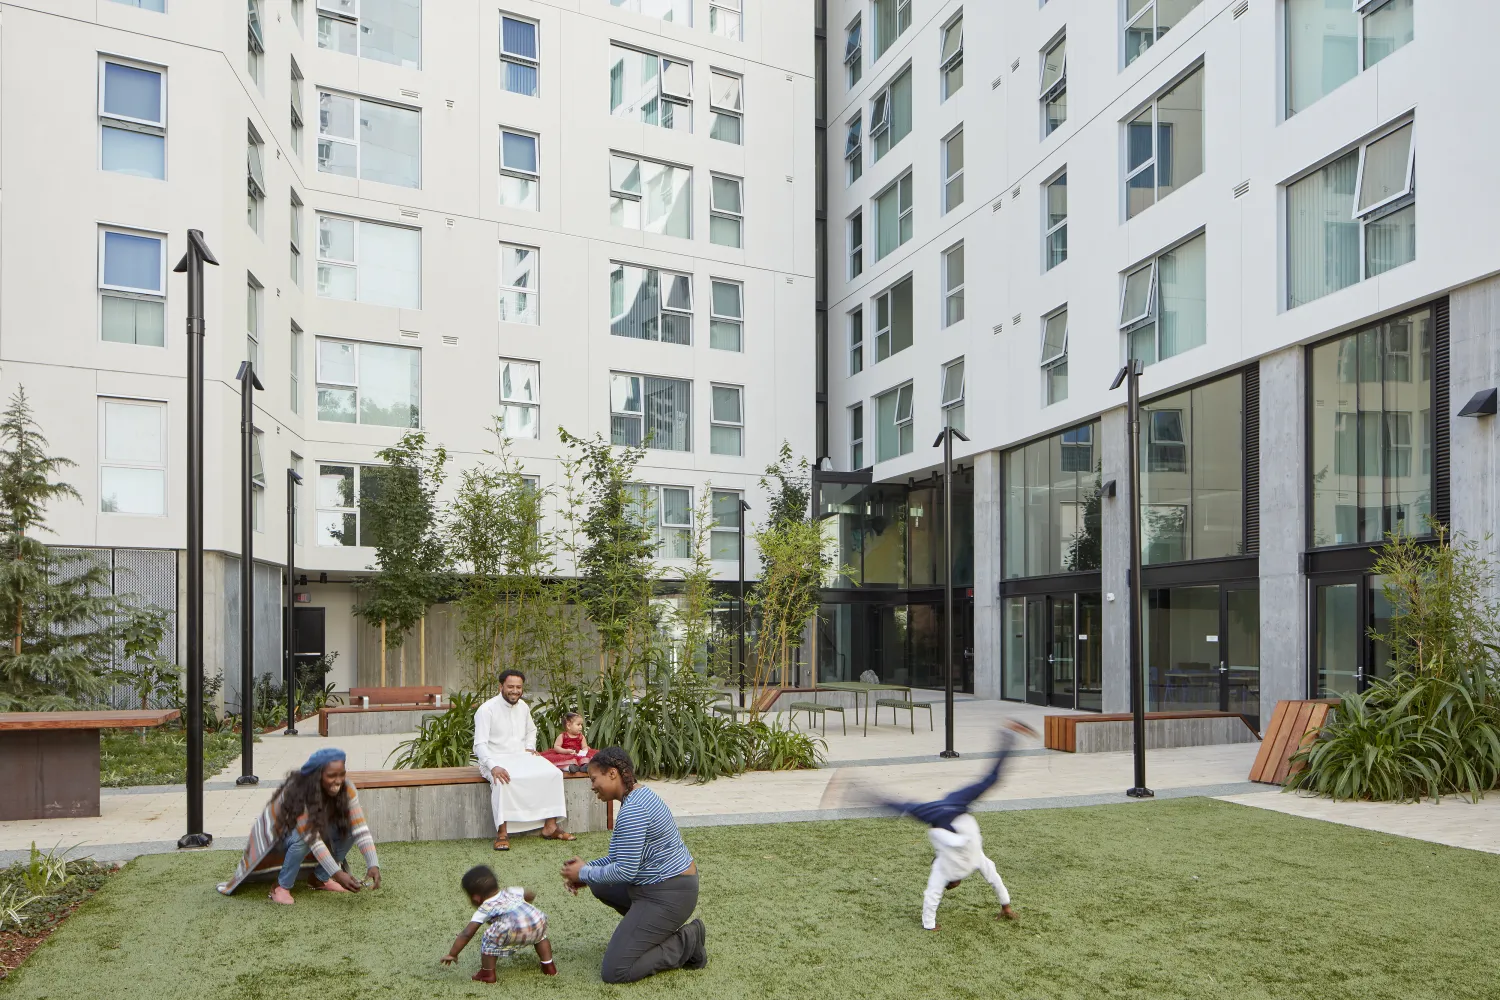 Families playing in the Courtyard of 222 Taylor Street, affordable housing in San Francisco